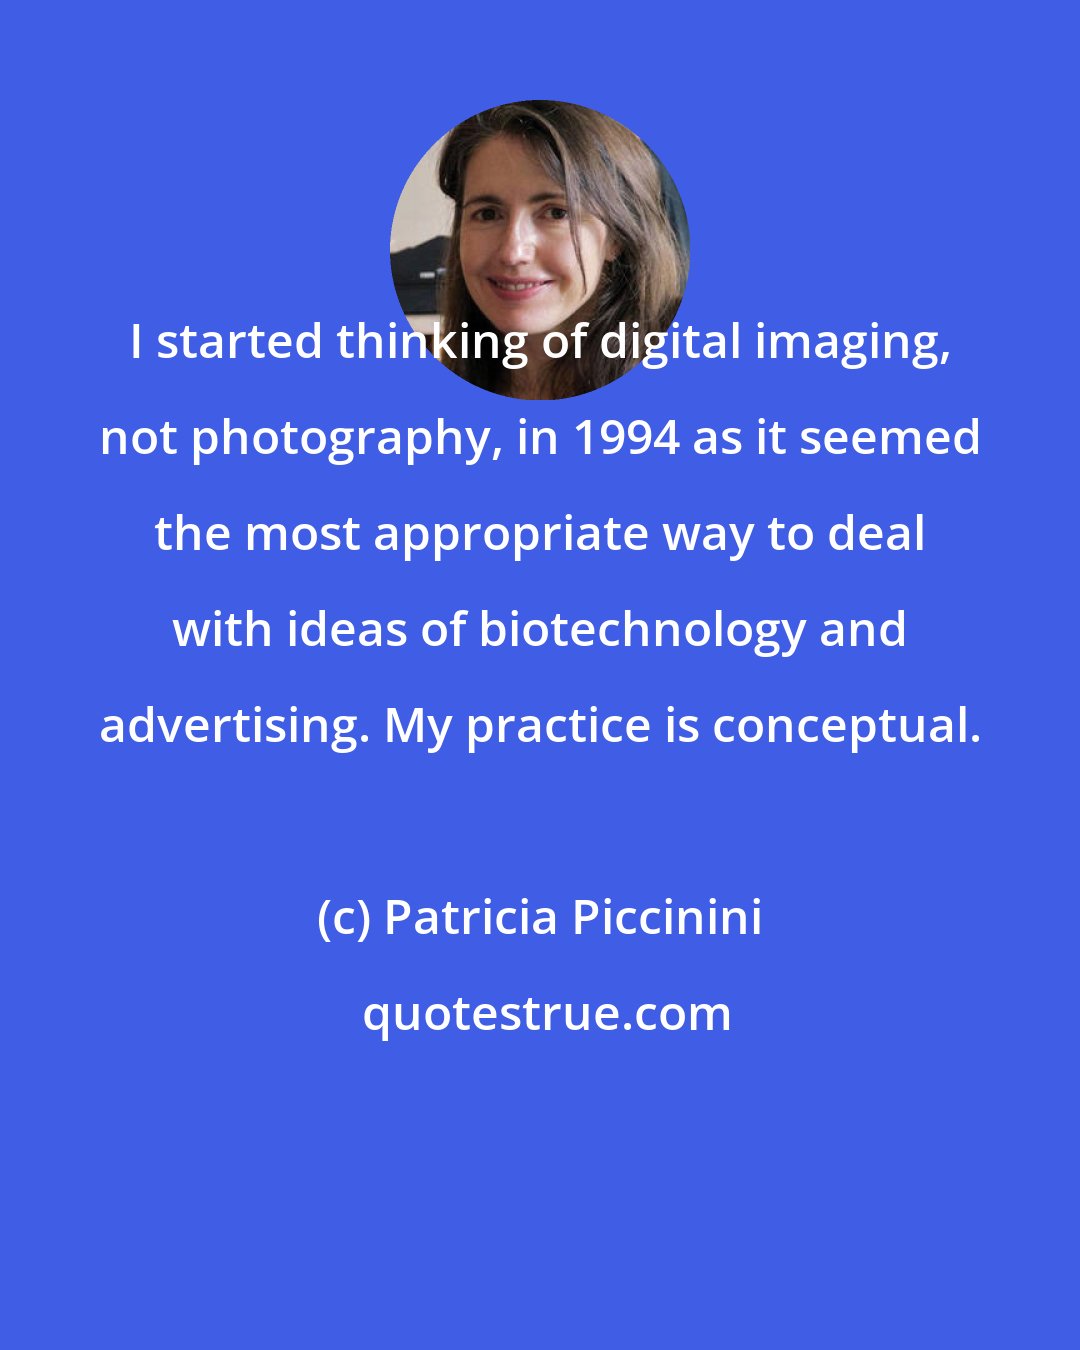 Patricia Piccinini: I started thinking of digital imaging, not photography, in 1994 as it seemed the most appropriate way to deal with ideas of biotechnology and advertising. My practice is conceptual.